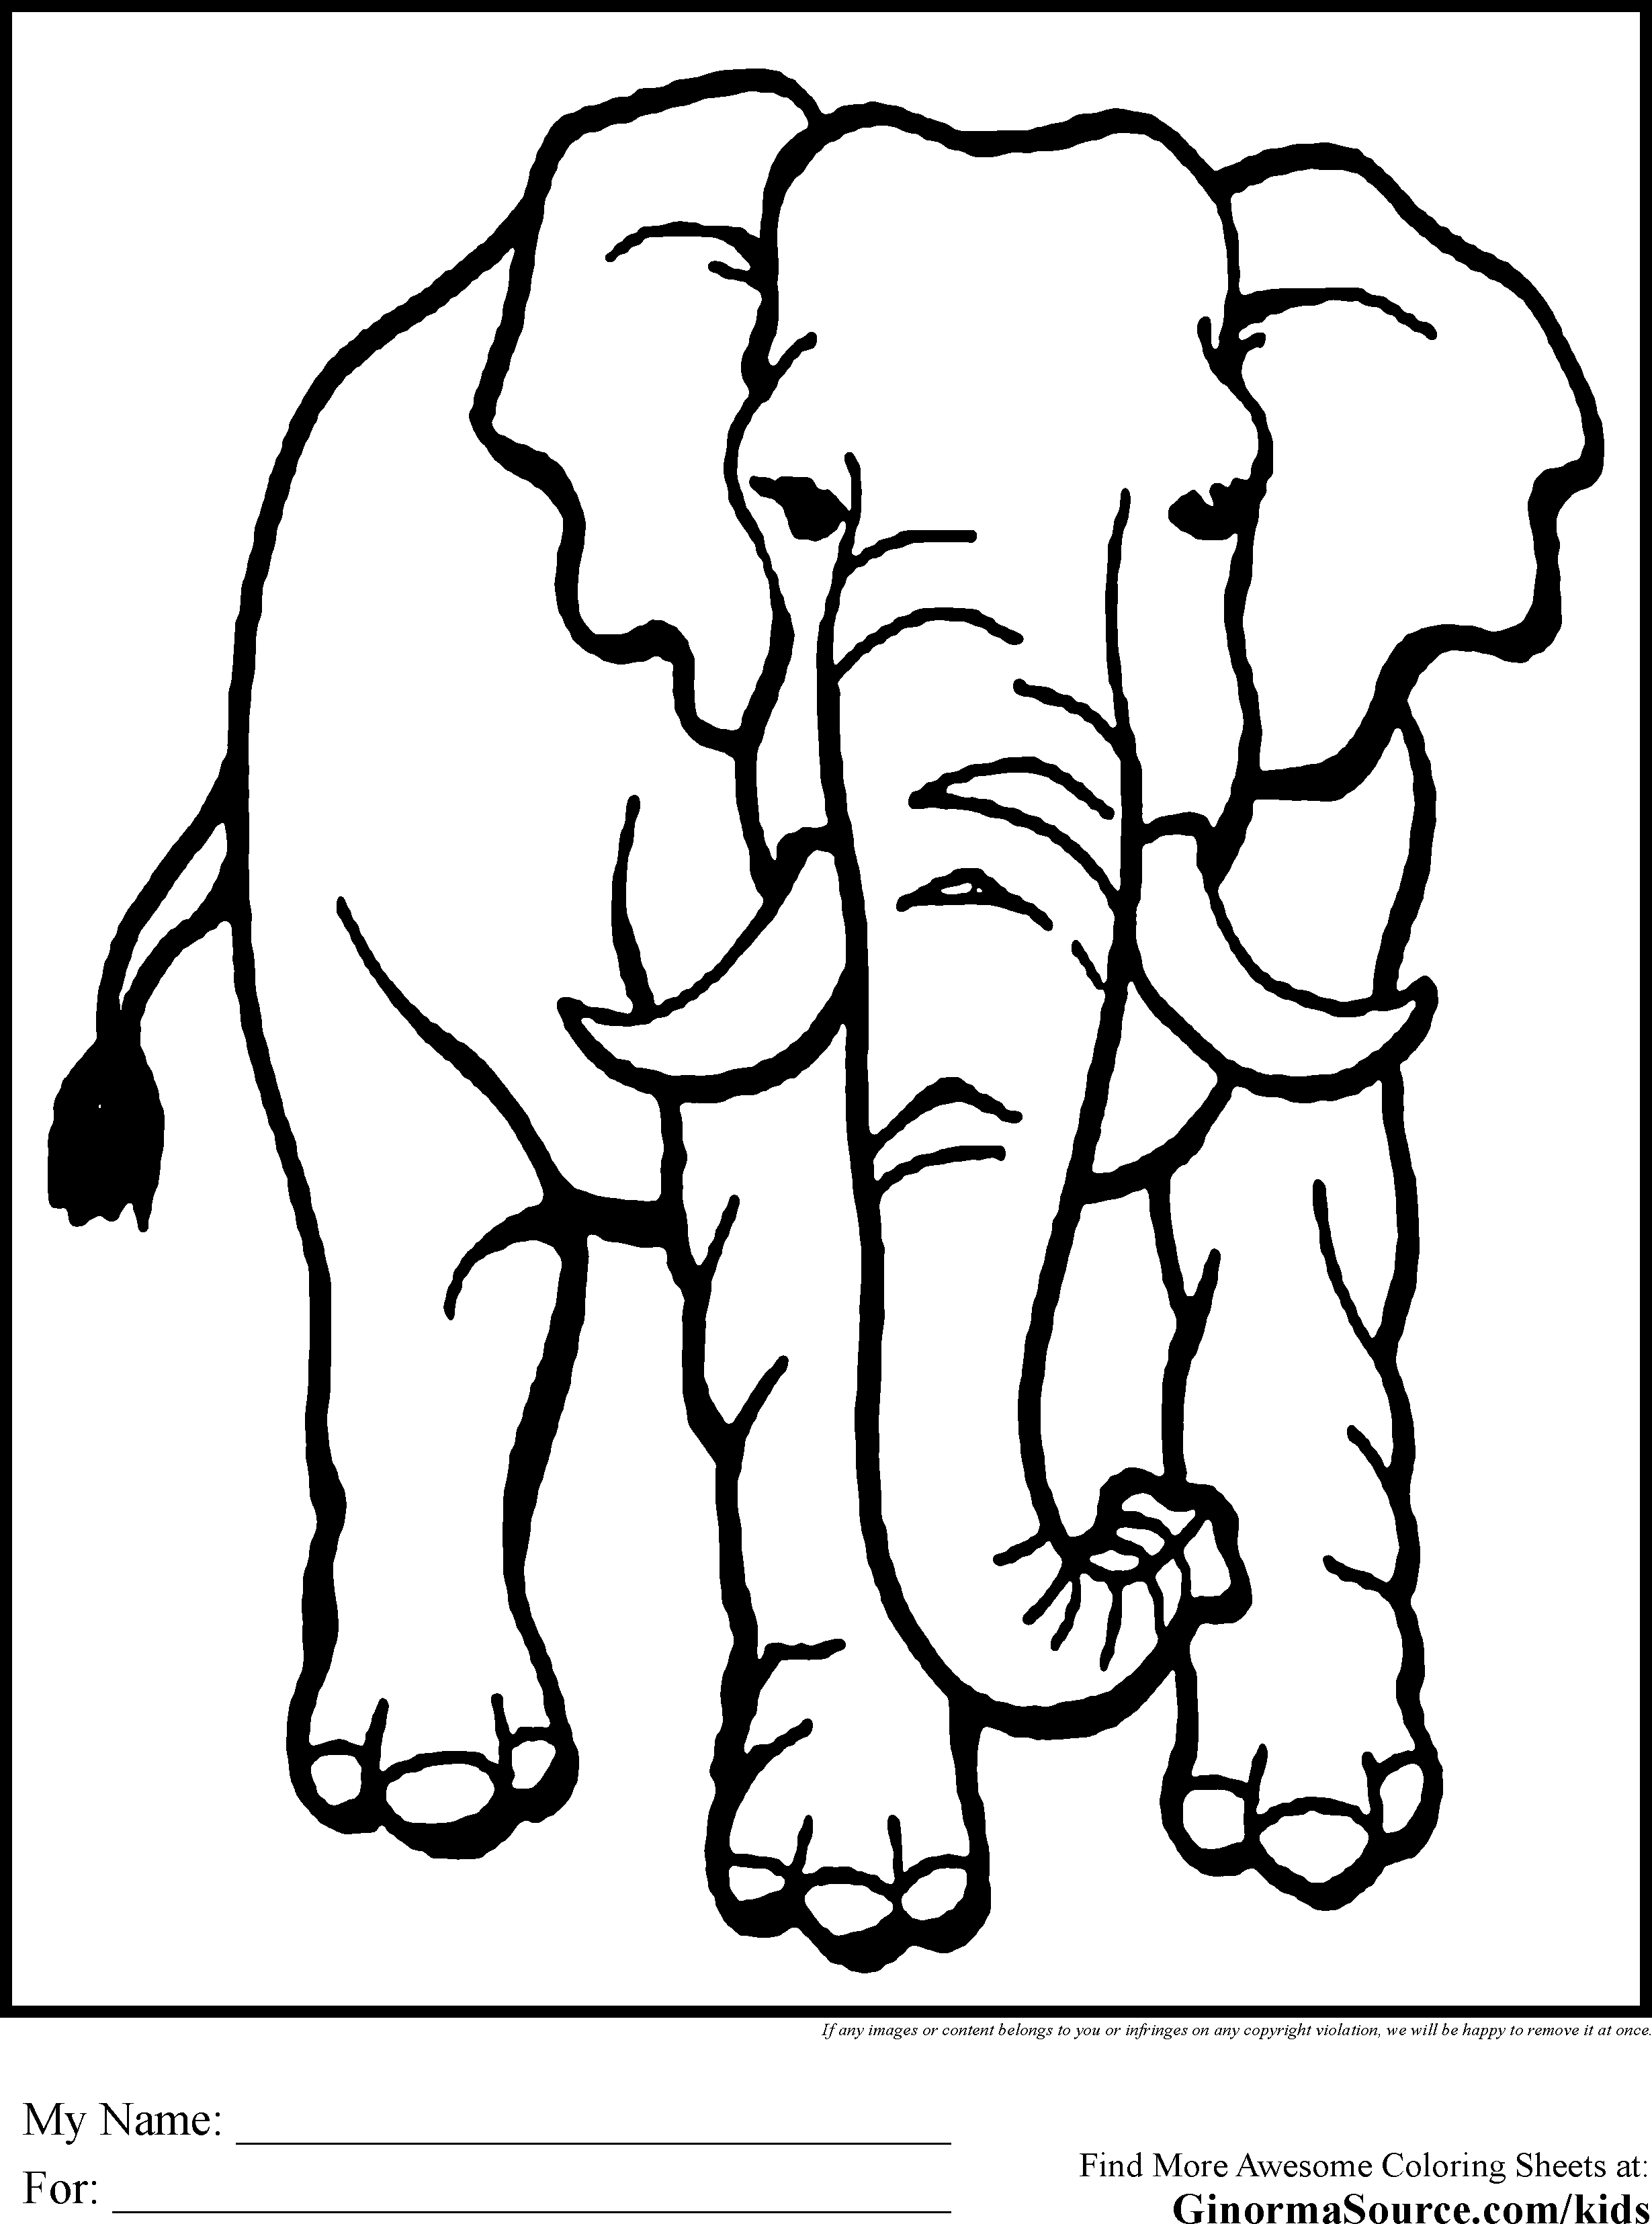 colouring pages big 5 animals coloring pages animals elephant elephant coloring page animals 5 pages colouring big 